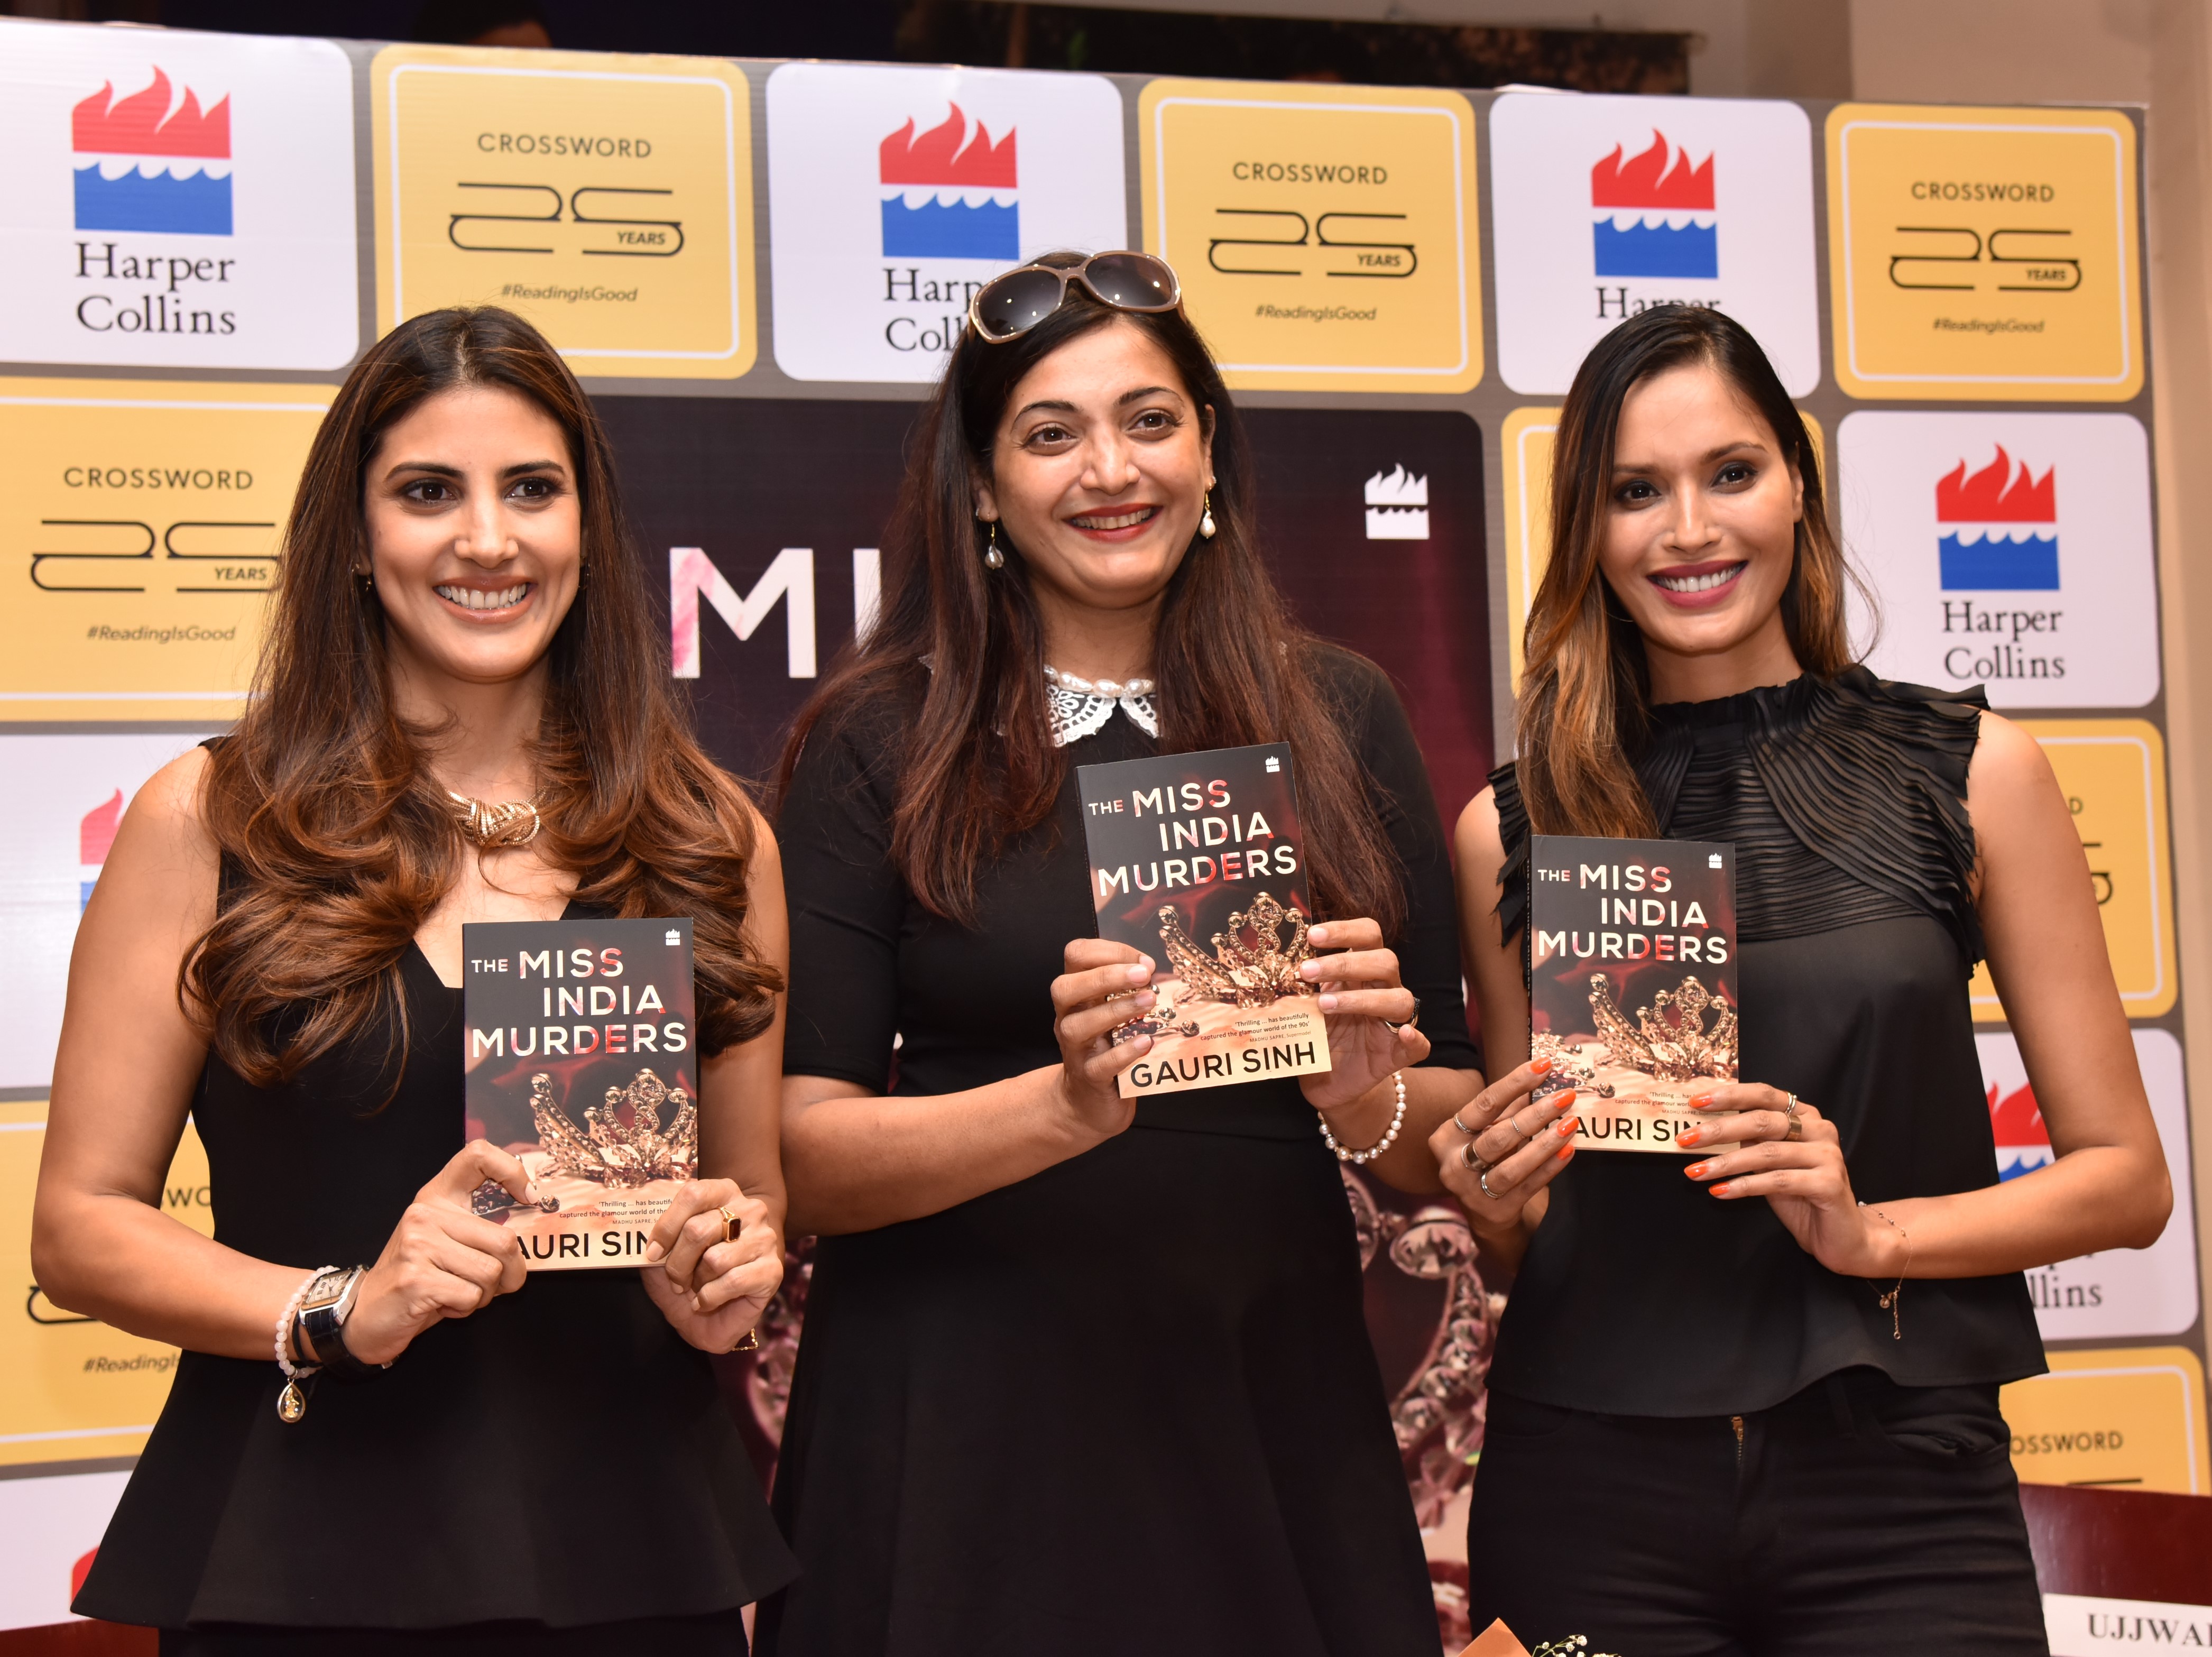 You are currently viewing Senior Journalist Gauri Sinh launches mystery novel “The Miss India Murders” at Crossword Bookstores